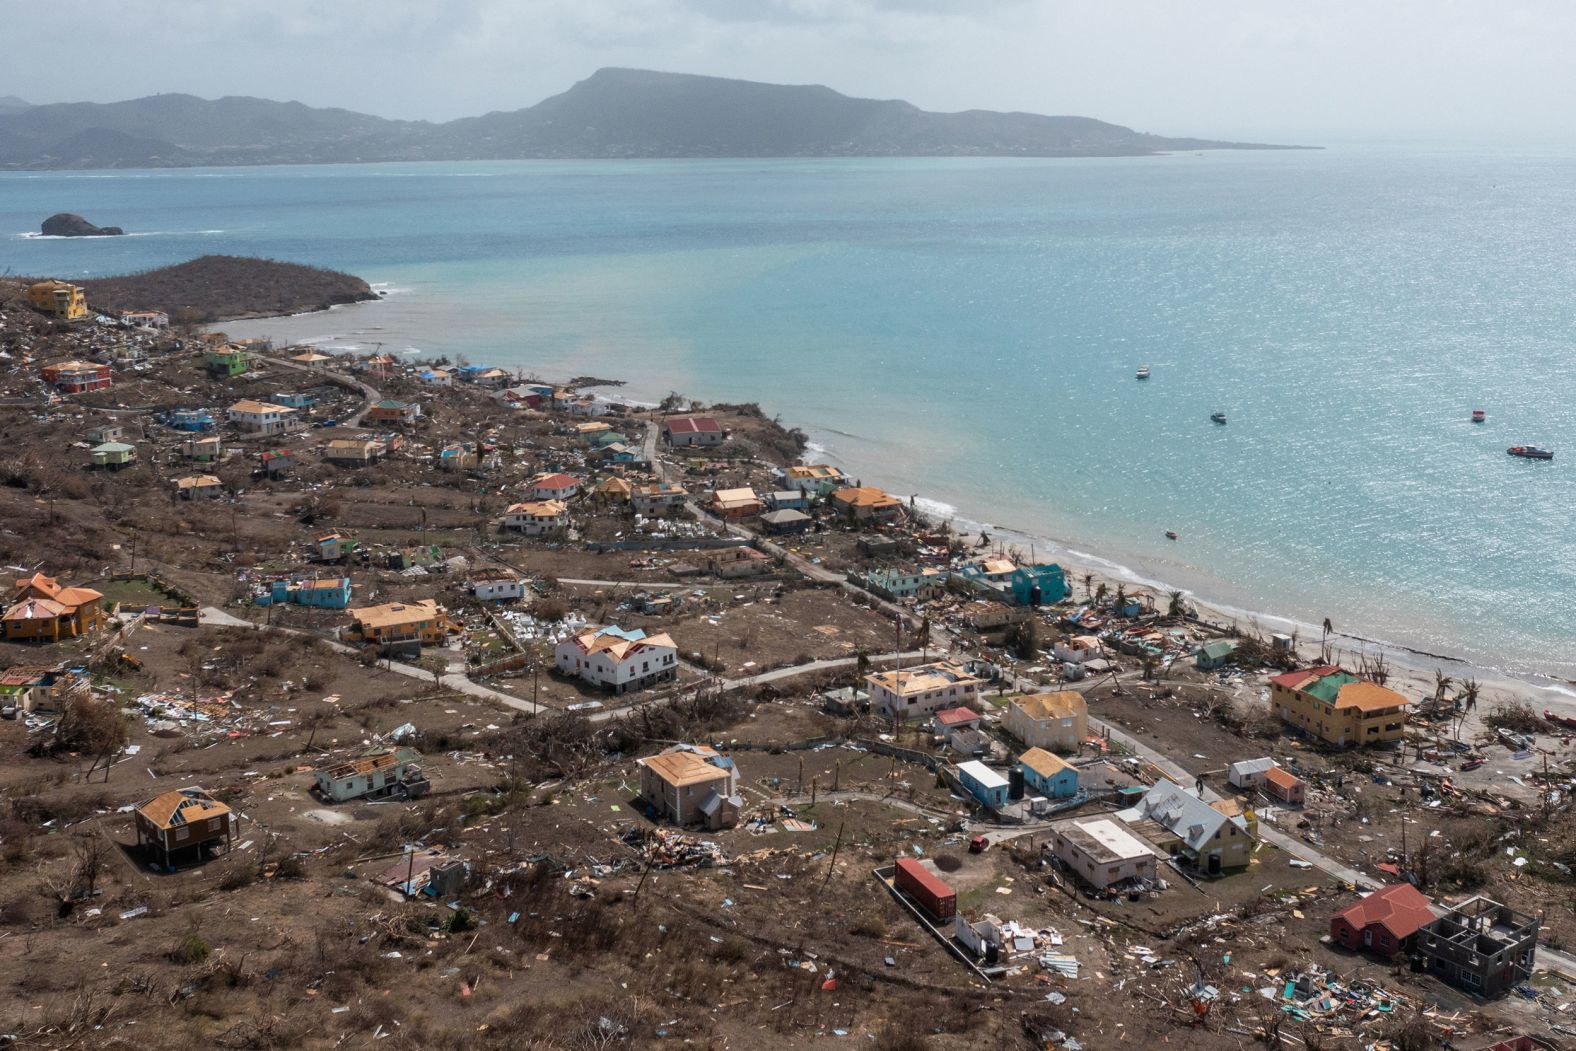 Homes are damaged on the island of Petite Martinique on Tuesday.